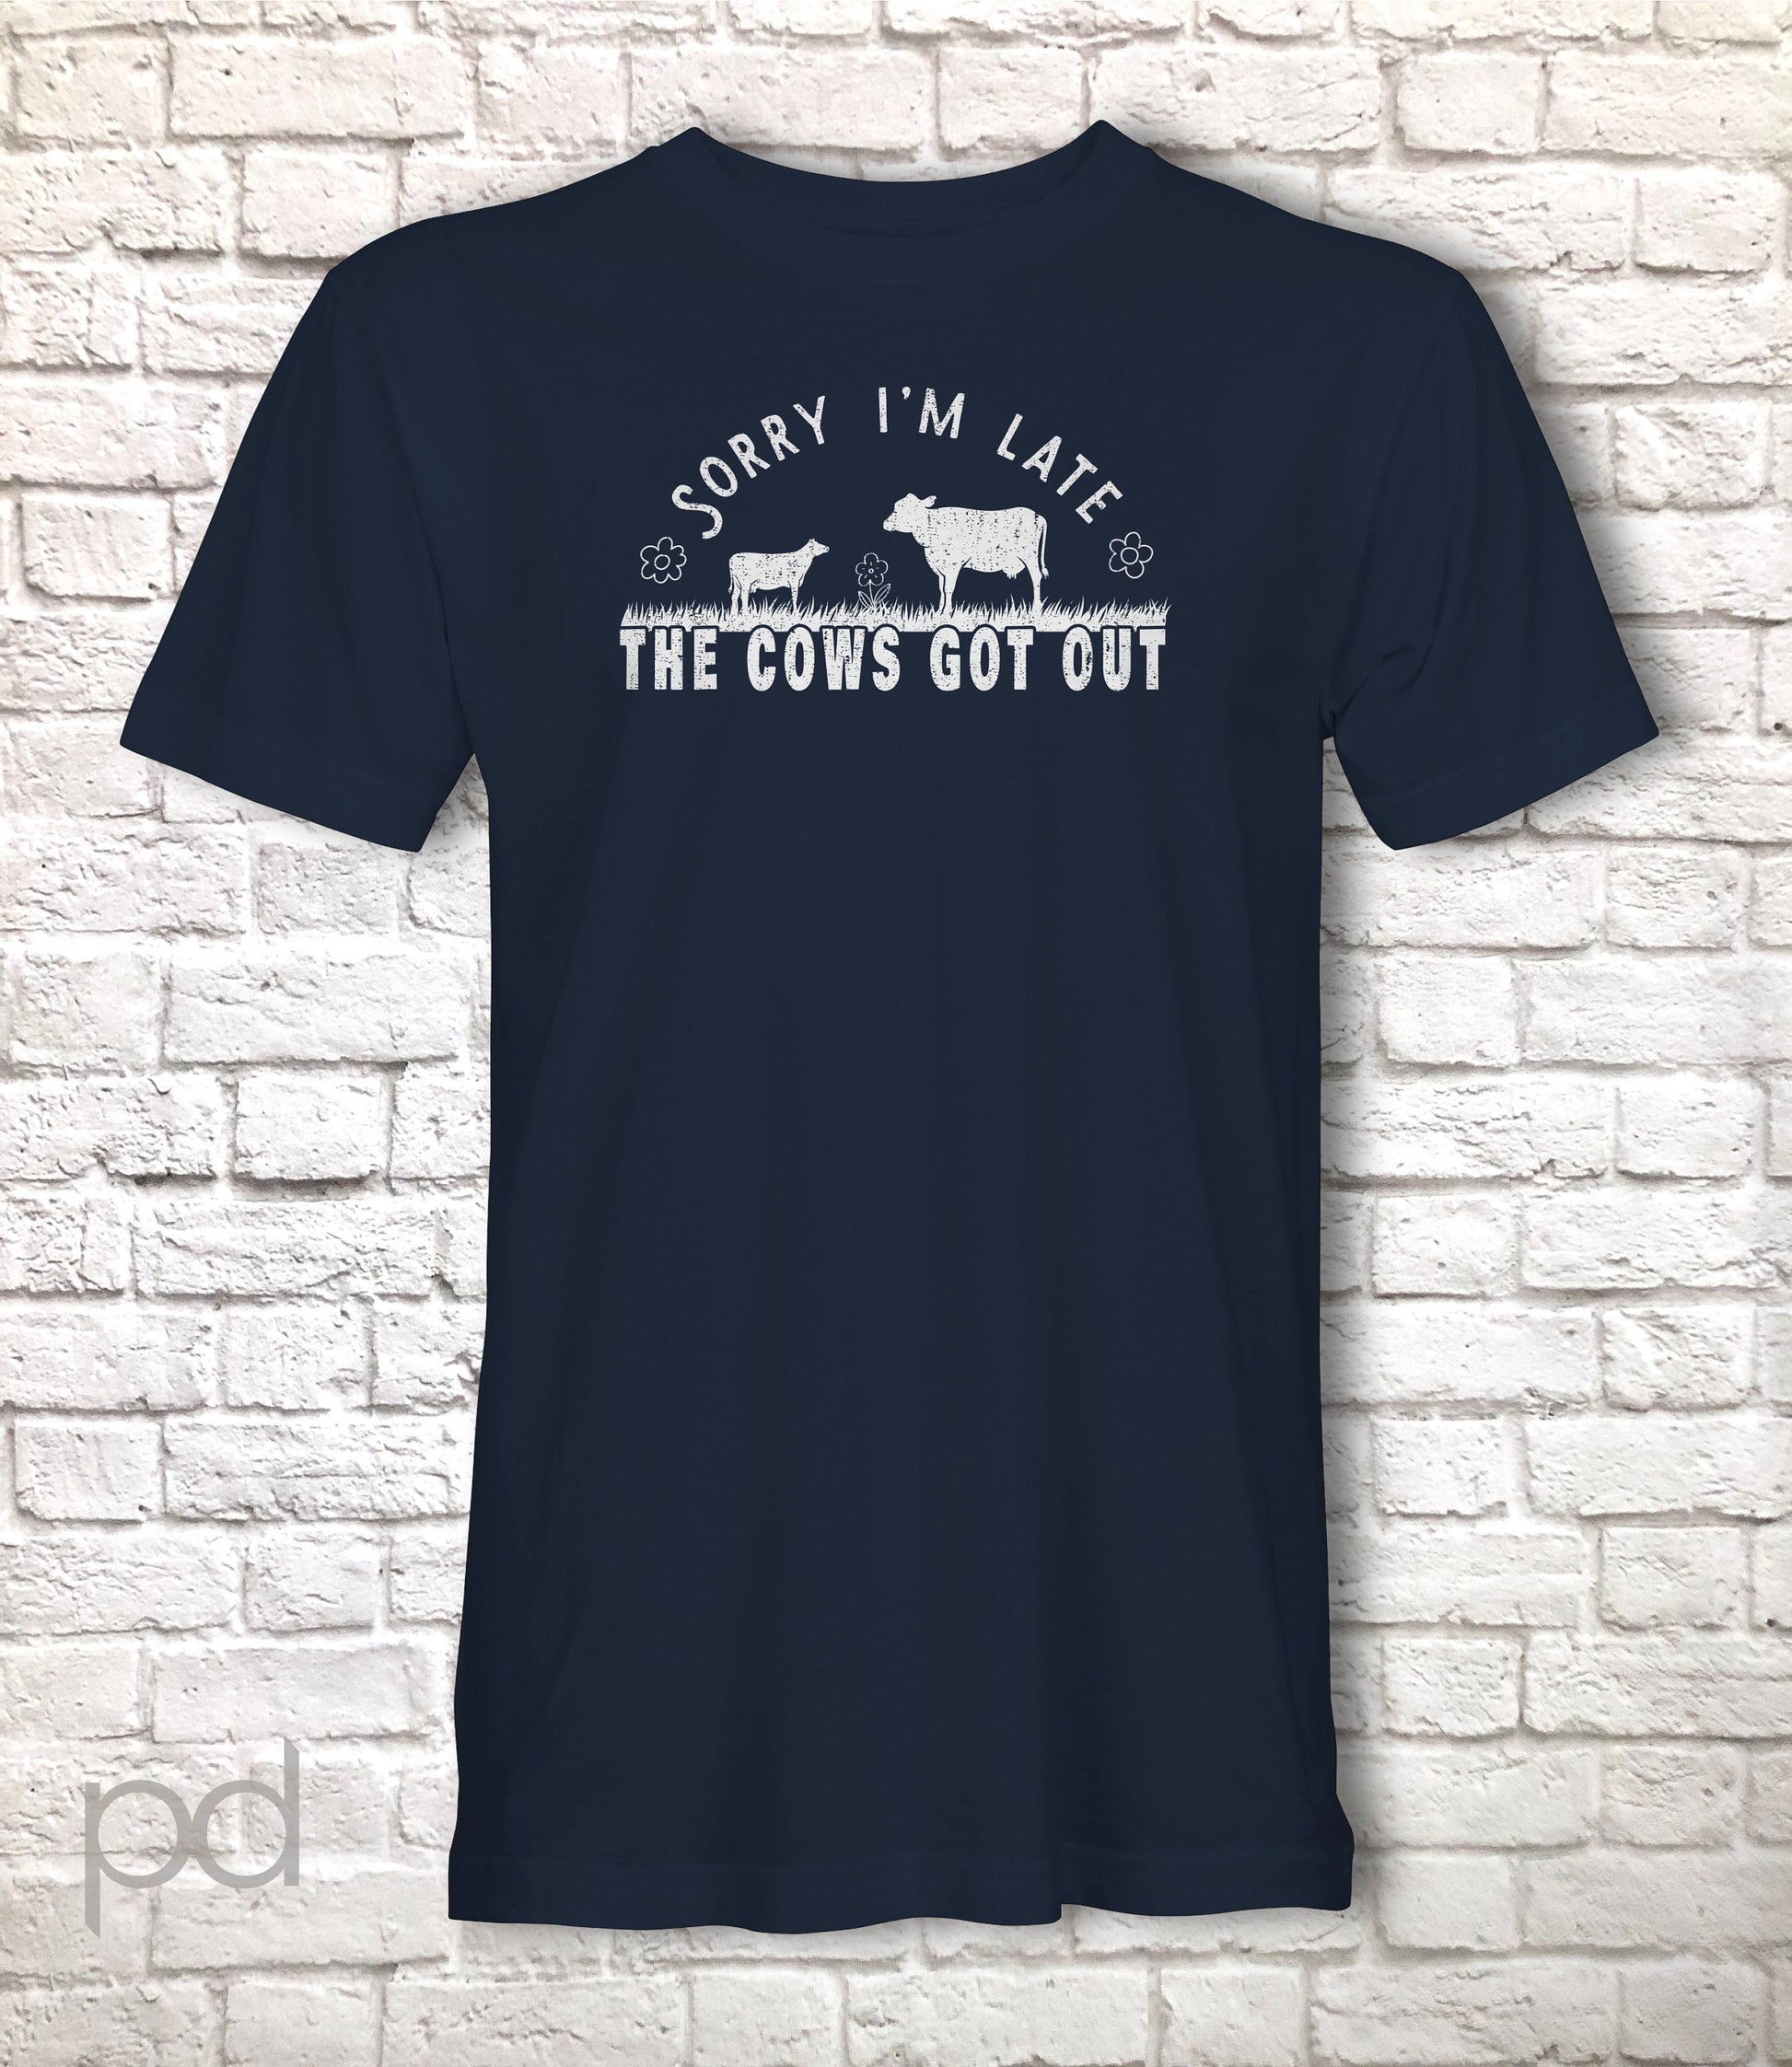 Funny Dairy Farmer T-Shirt, Sorry I'm Late, The Cows Were Out Gift Idea, Humorous Cow Milking Farming Tee Shirt T Top